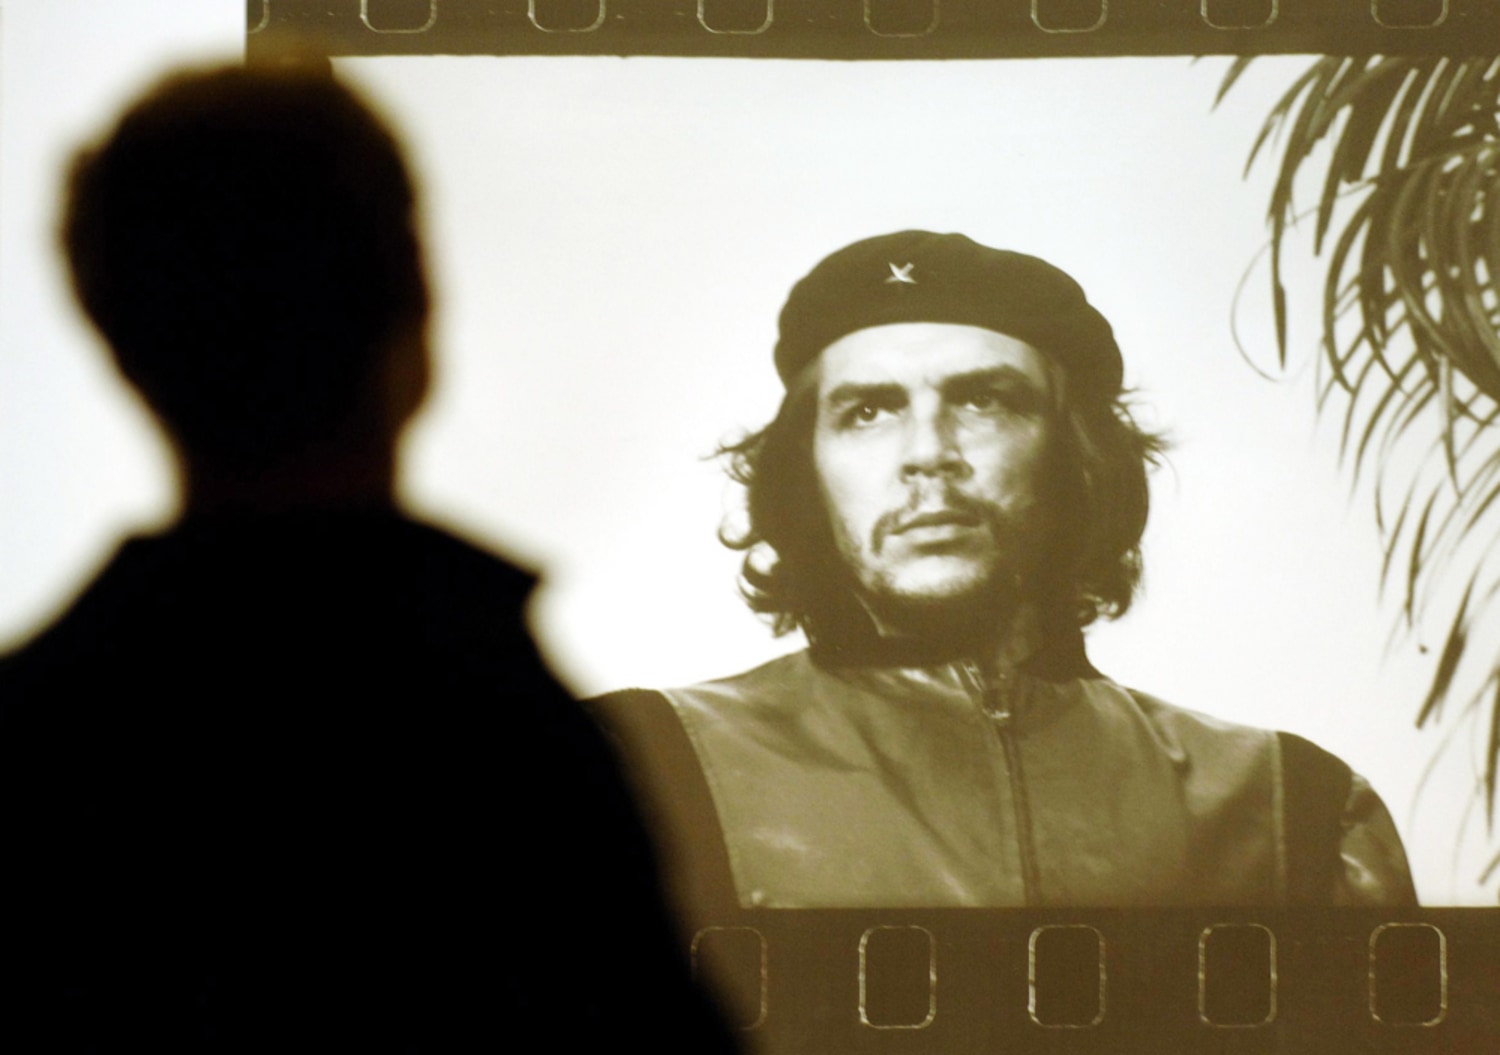 Che Guevara With Bling On: Rappers who Commodify the Revolution